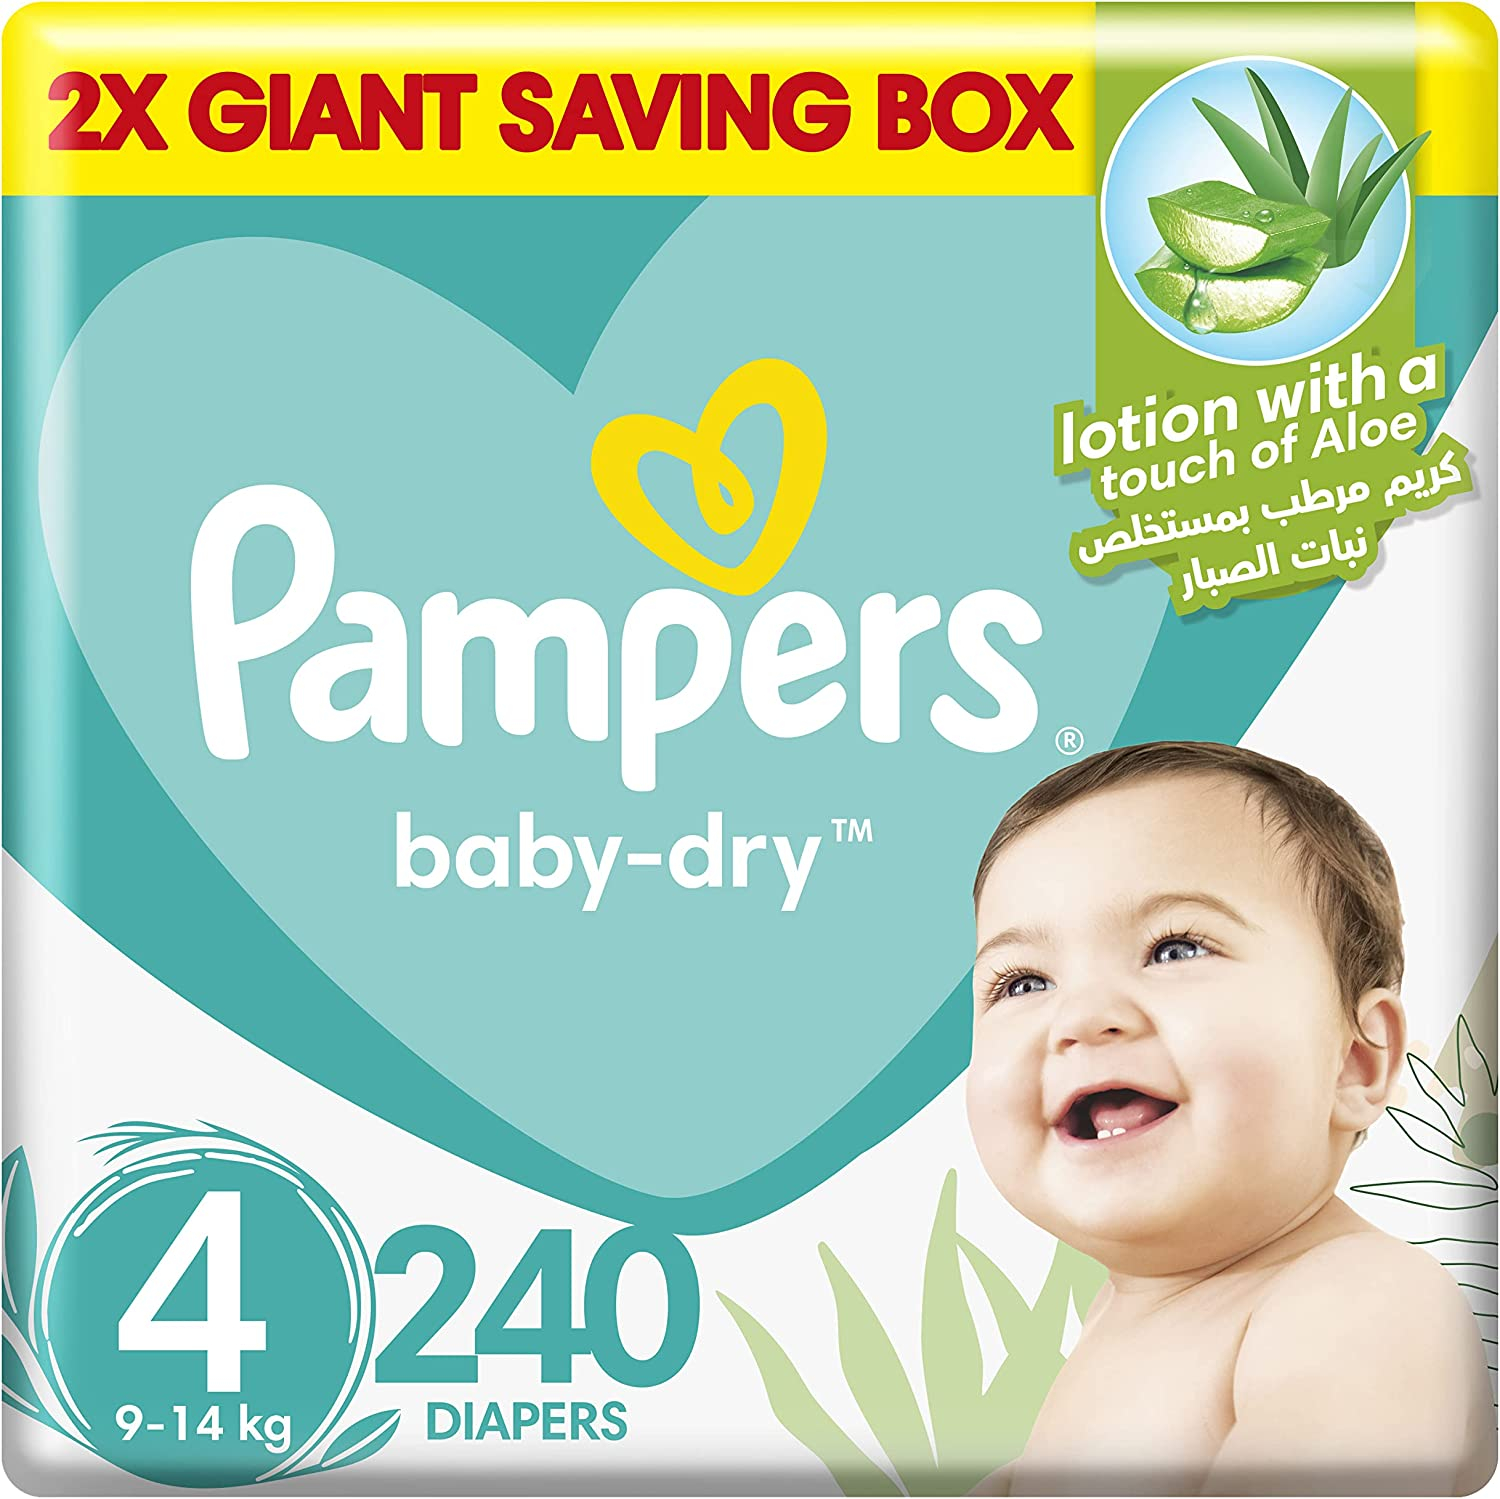 Pampers Baby-Dry Size 5, 11-16kg, 23 Nappies